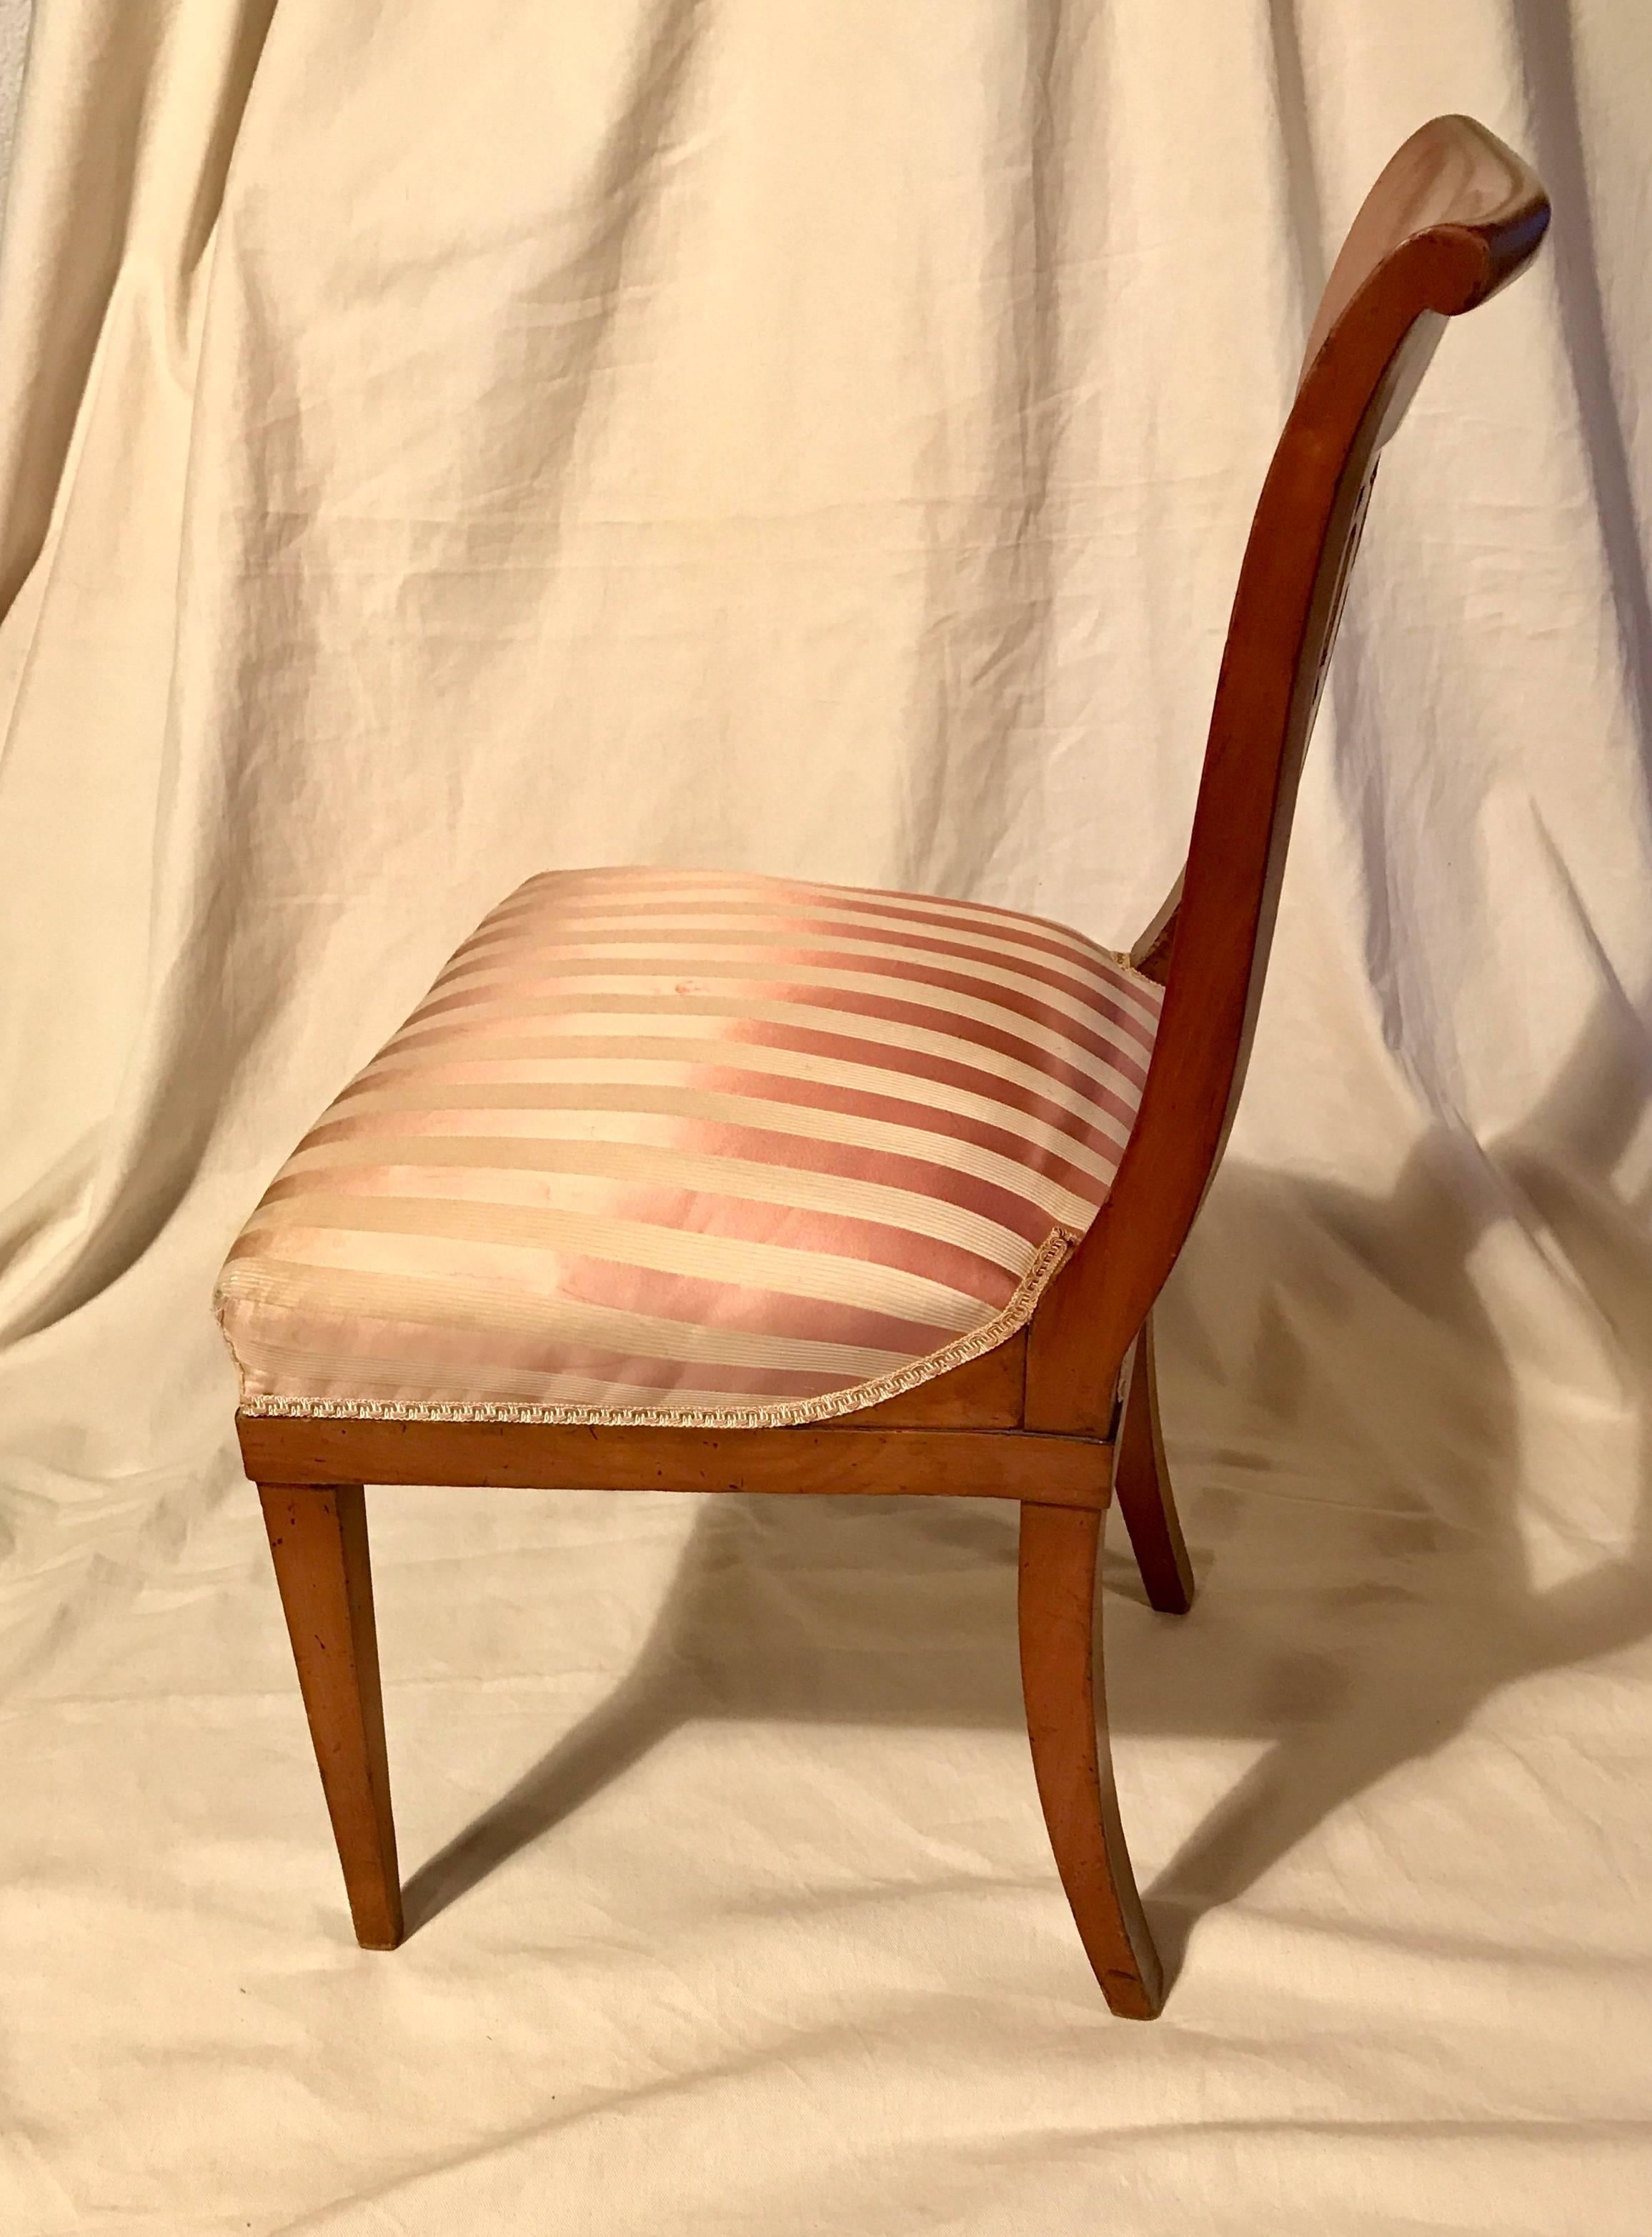 Set of six unique classicist chairs, Germany, 1810, cherrywood. The backs are exquisitely carved. The chairs are in very good original condition. 